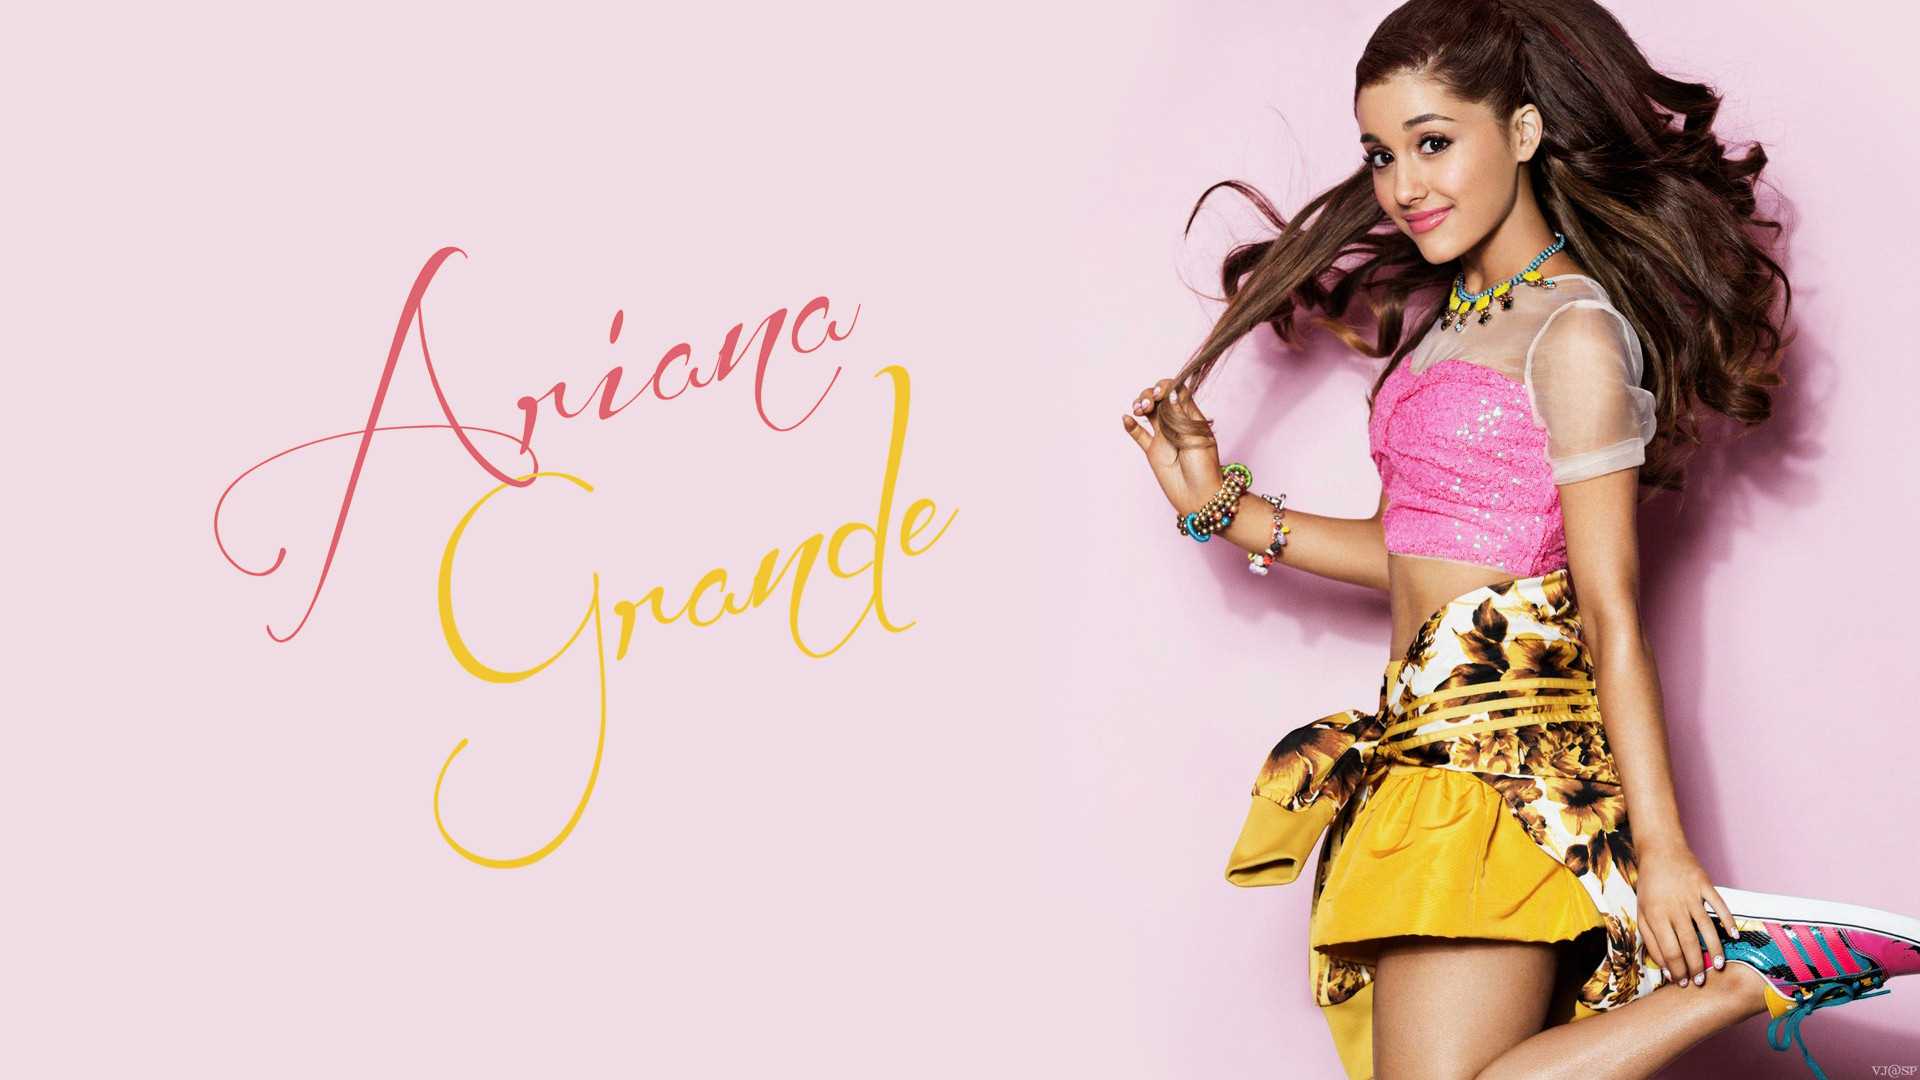 Ariana Grande Background for Computer